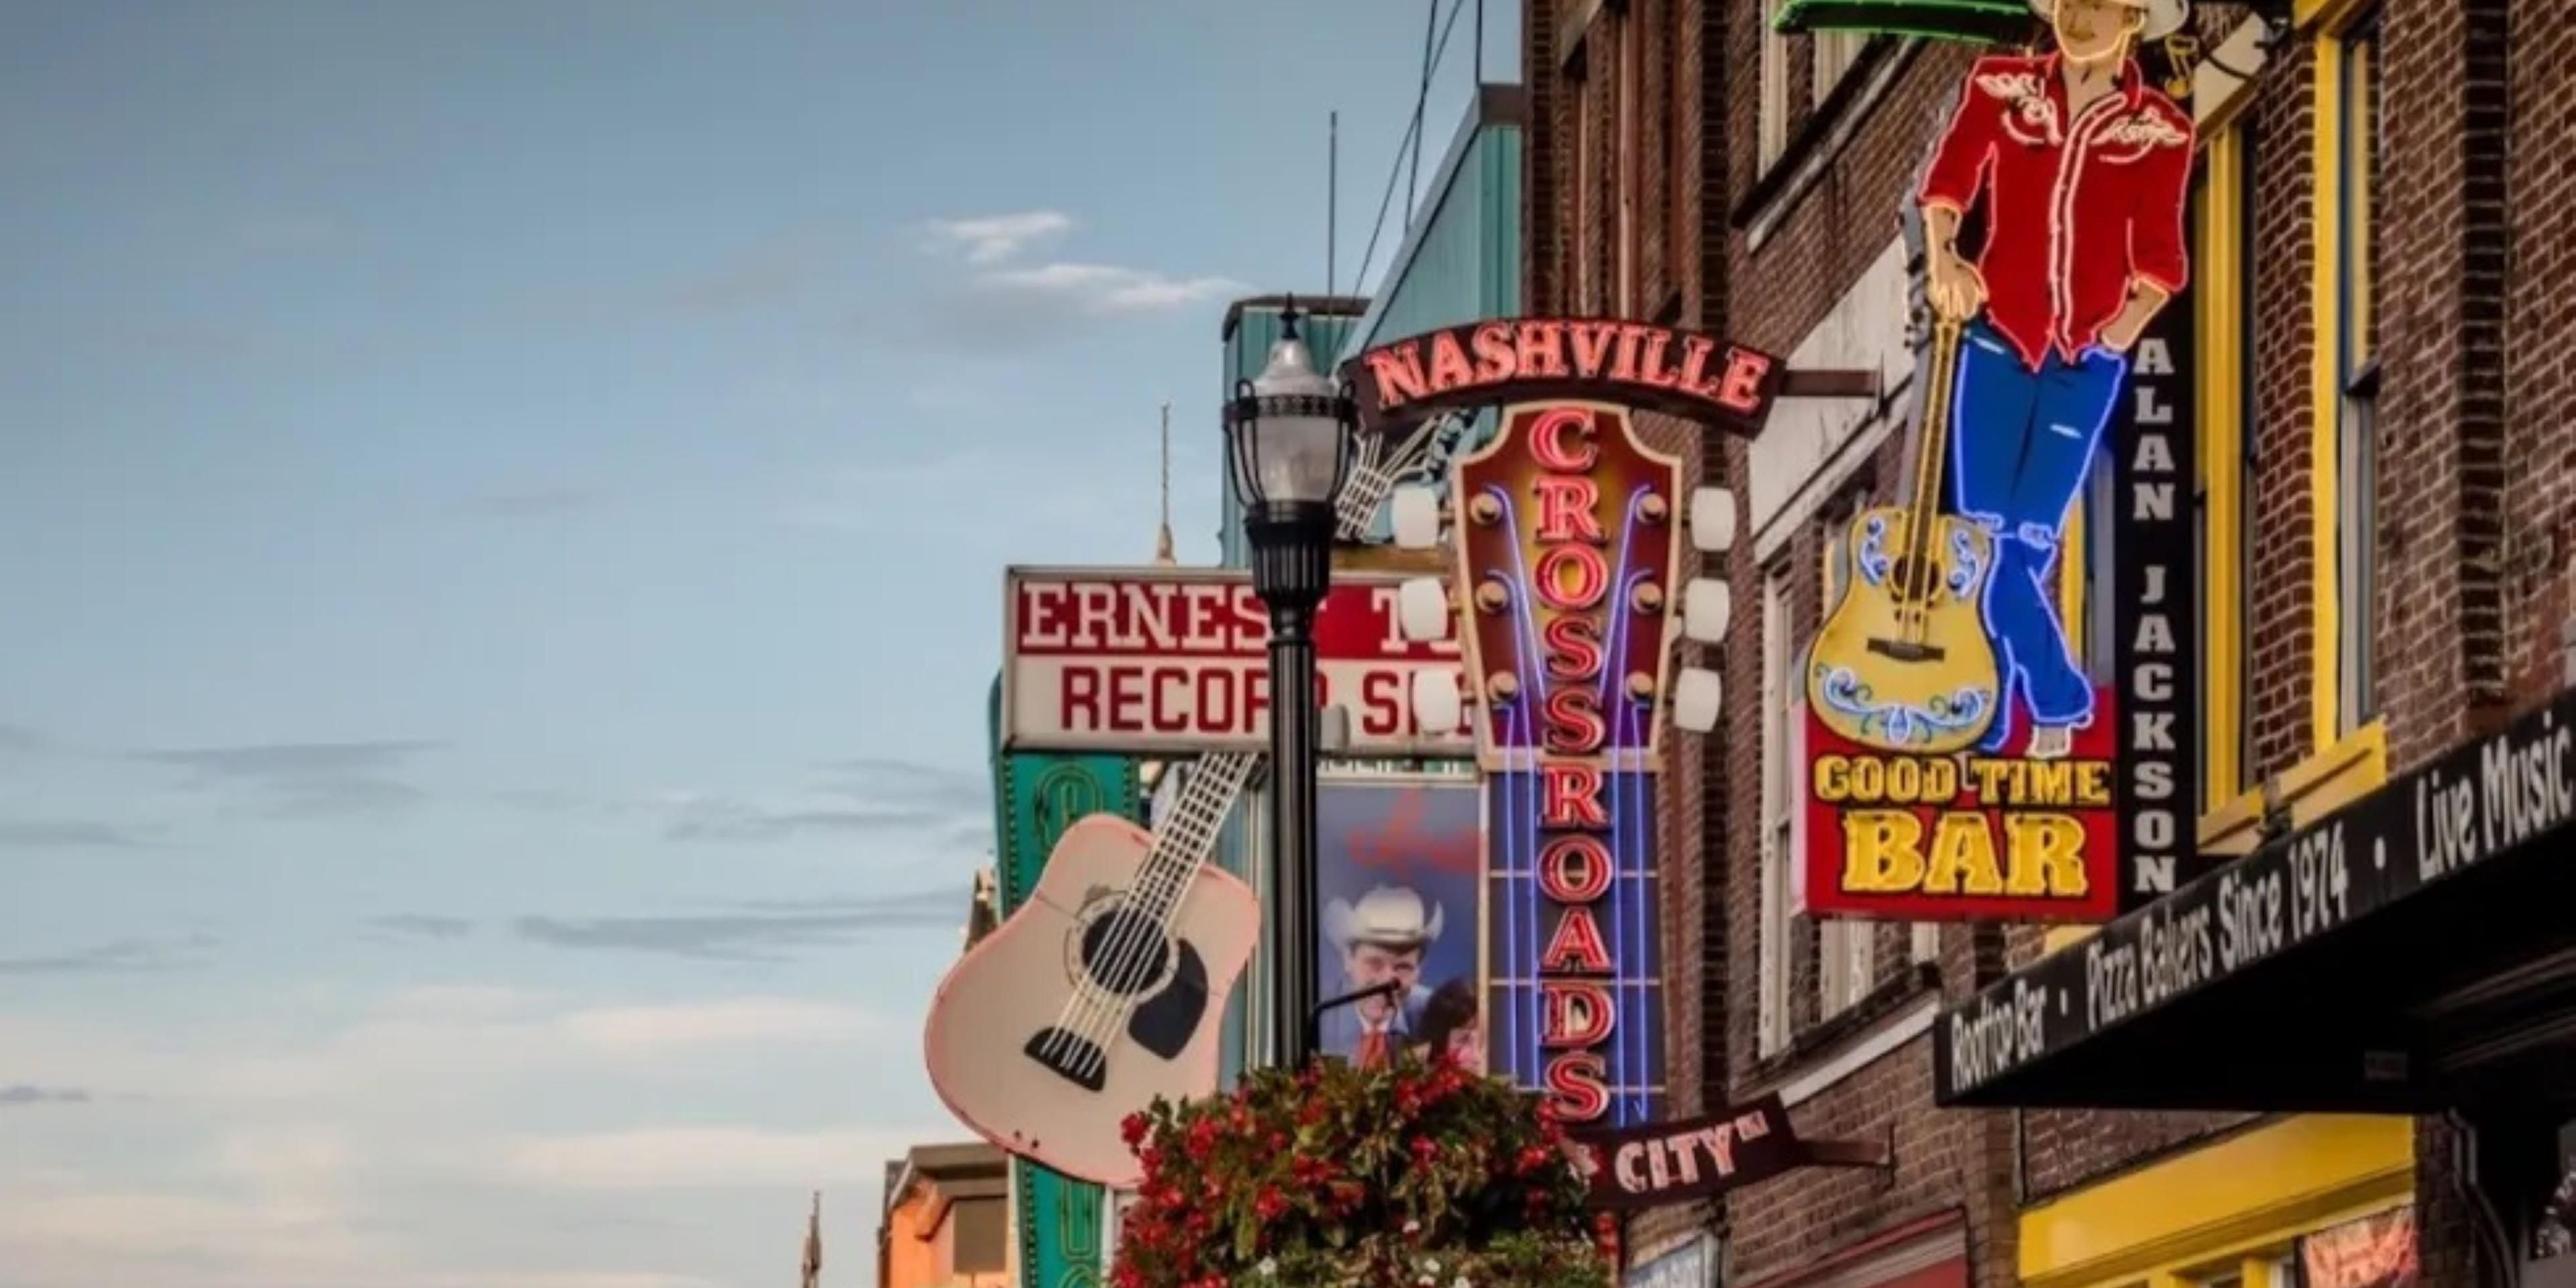 Located only 29 miles from the famous Broadway Street in Nashville TN.  Enjoy our affordable hotel, free parking and spacious rooms with a quick drive to Broadway Street in downtown Nashville TN.